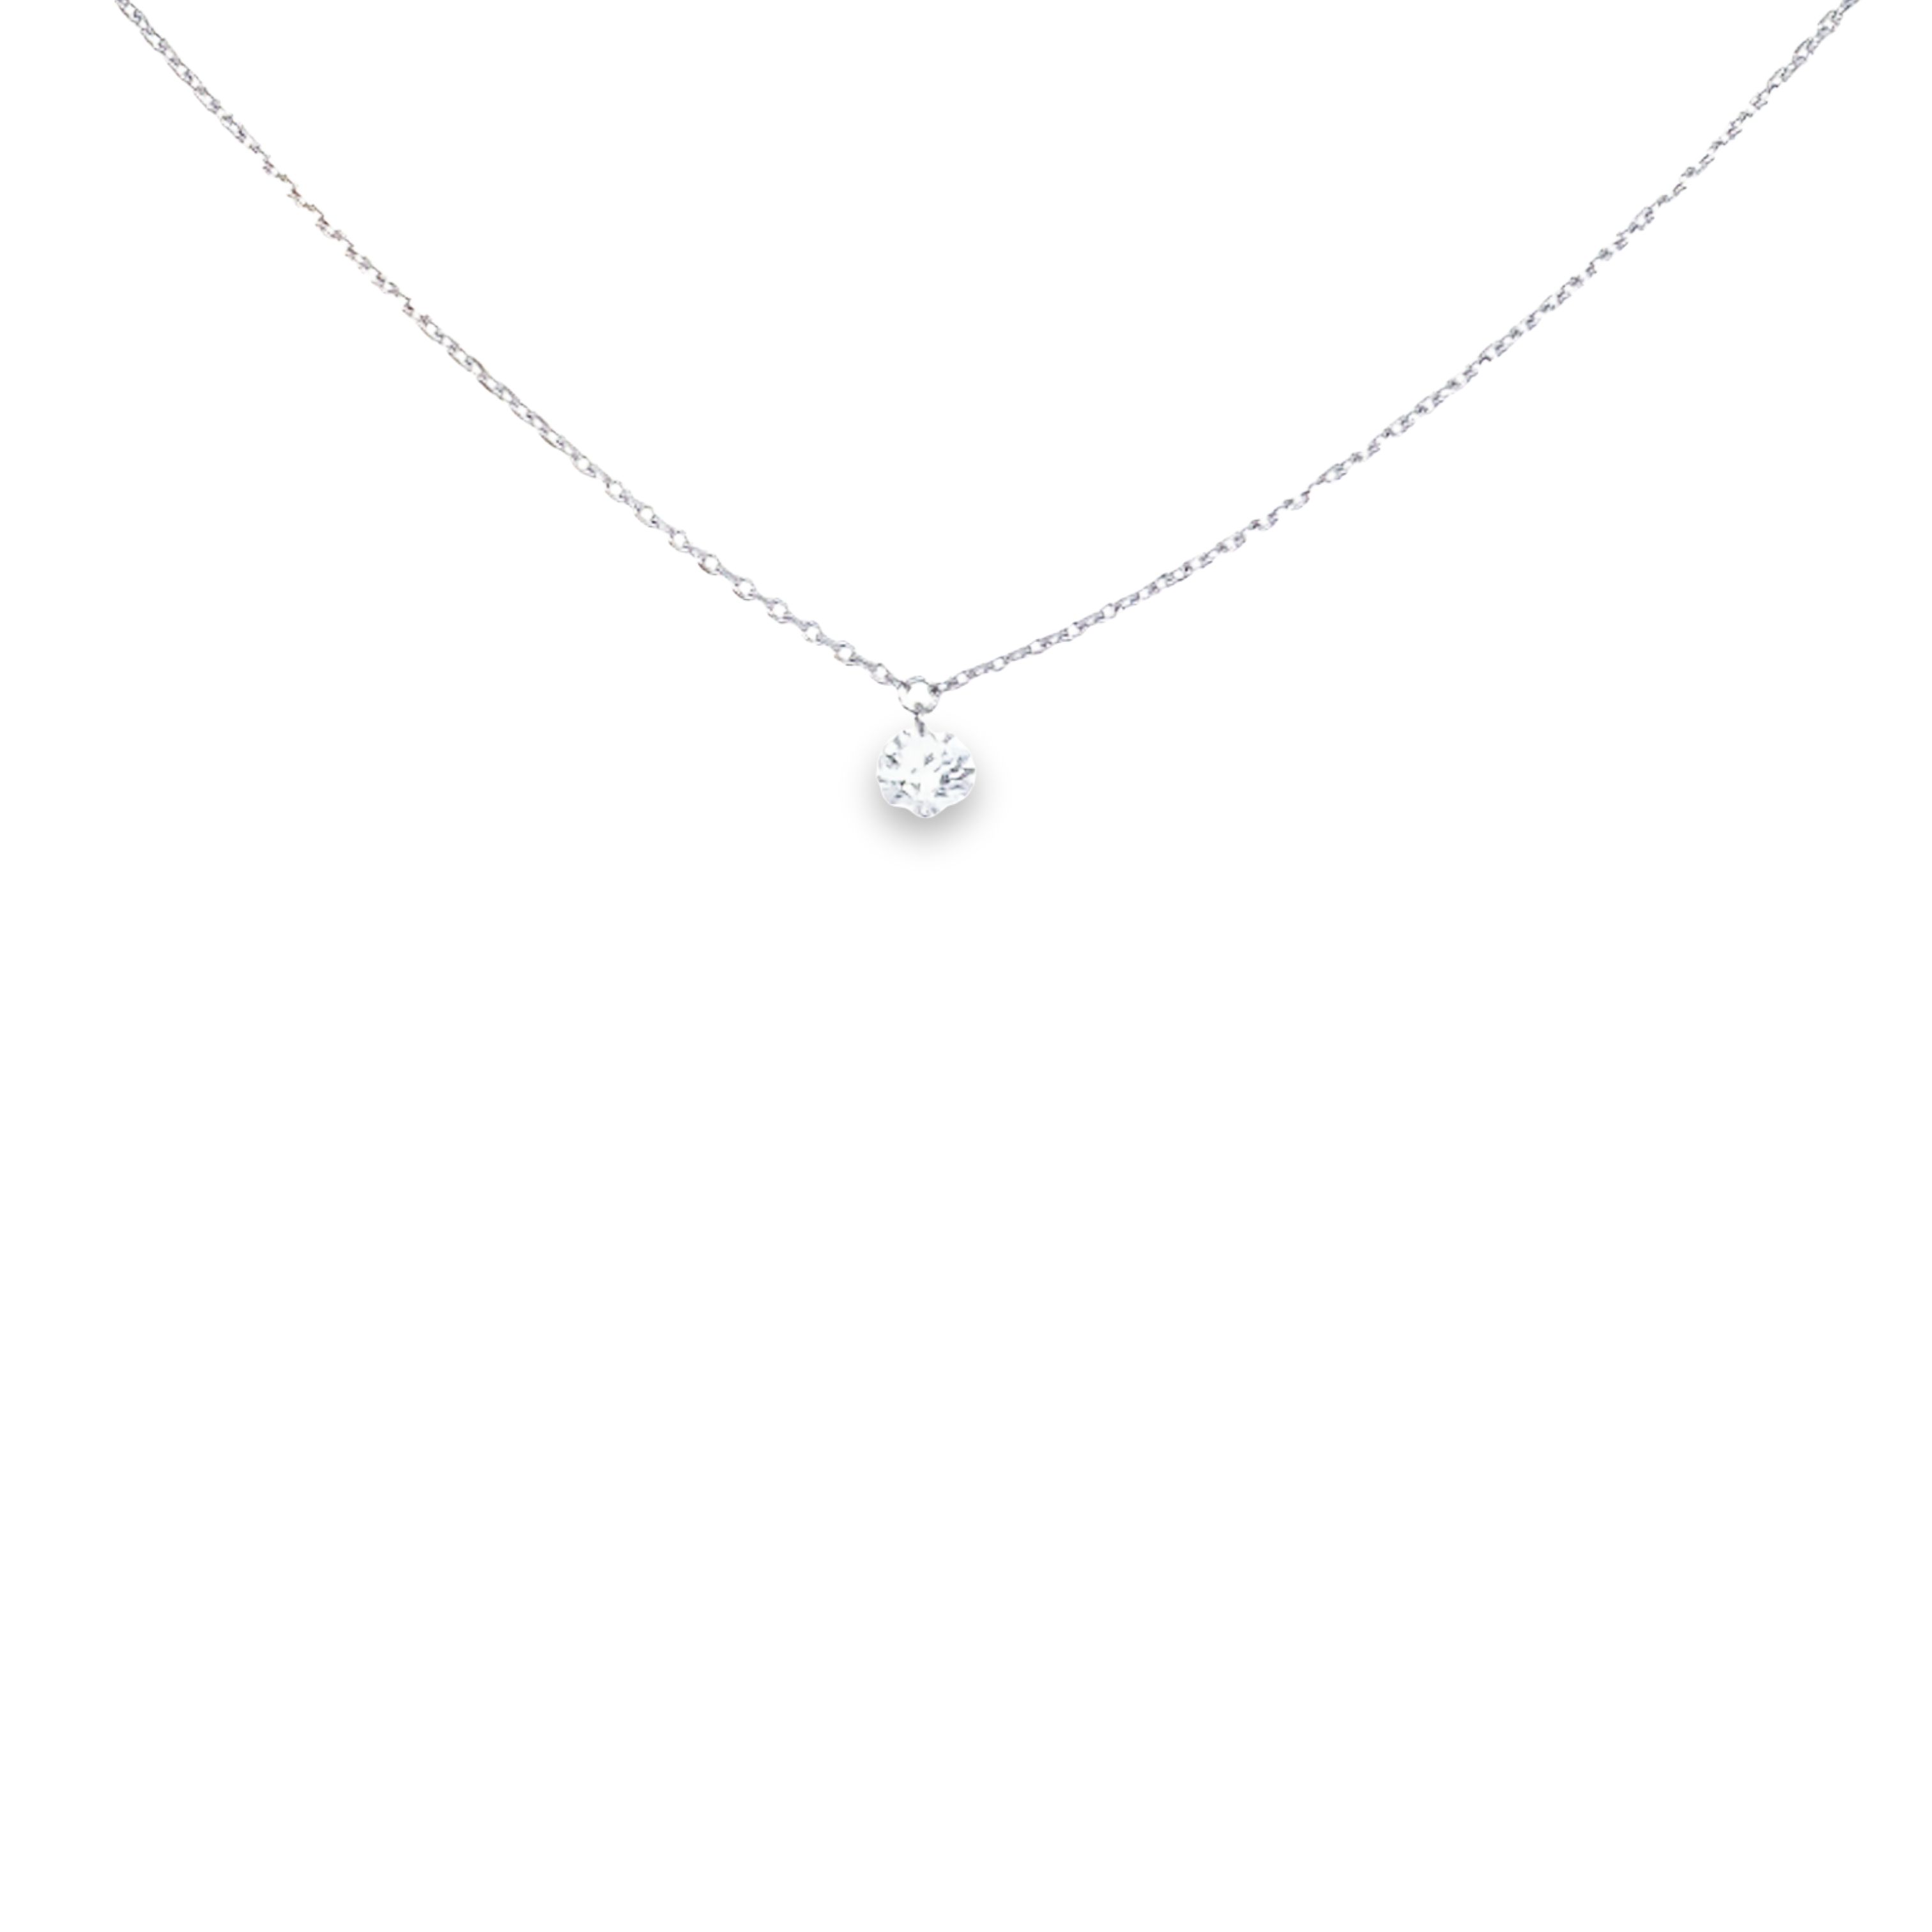 14 Karat white gold solitaire necklace with One 0.25Ct Round Brilliant G I Diamond